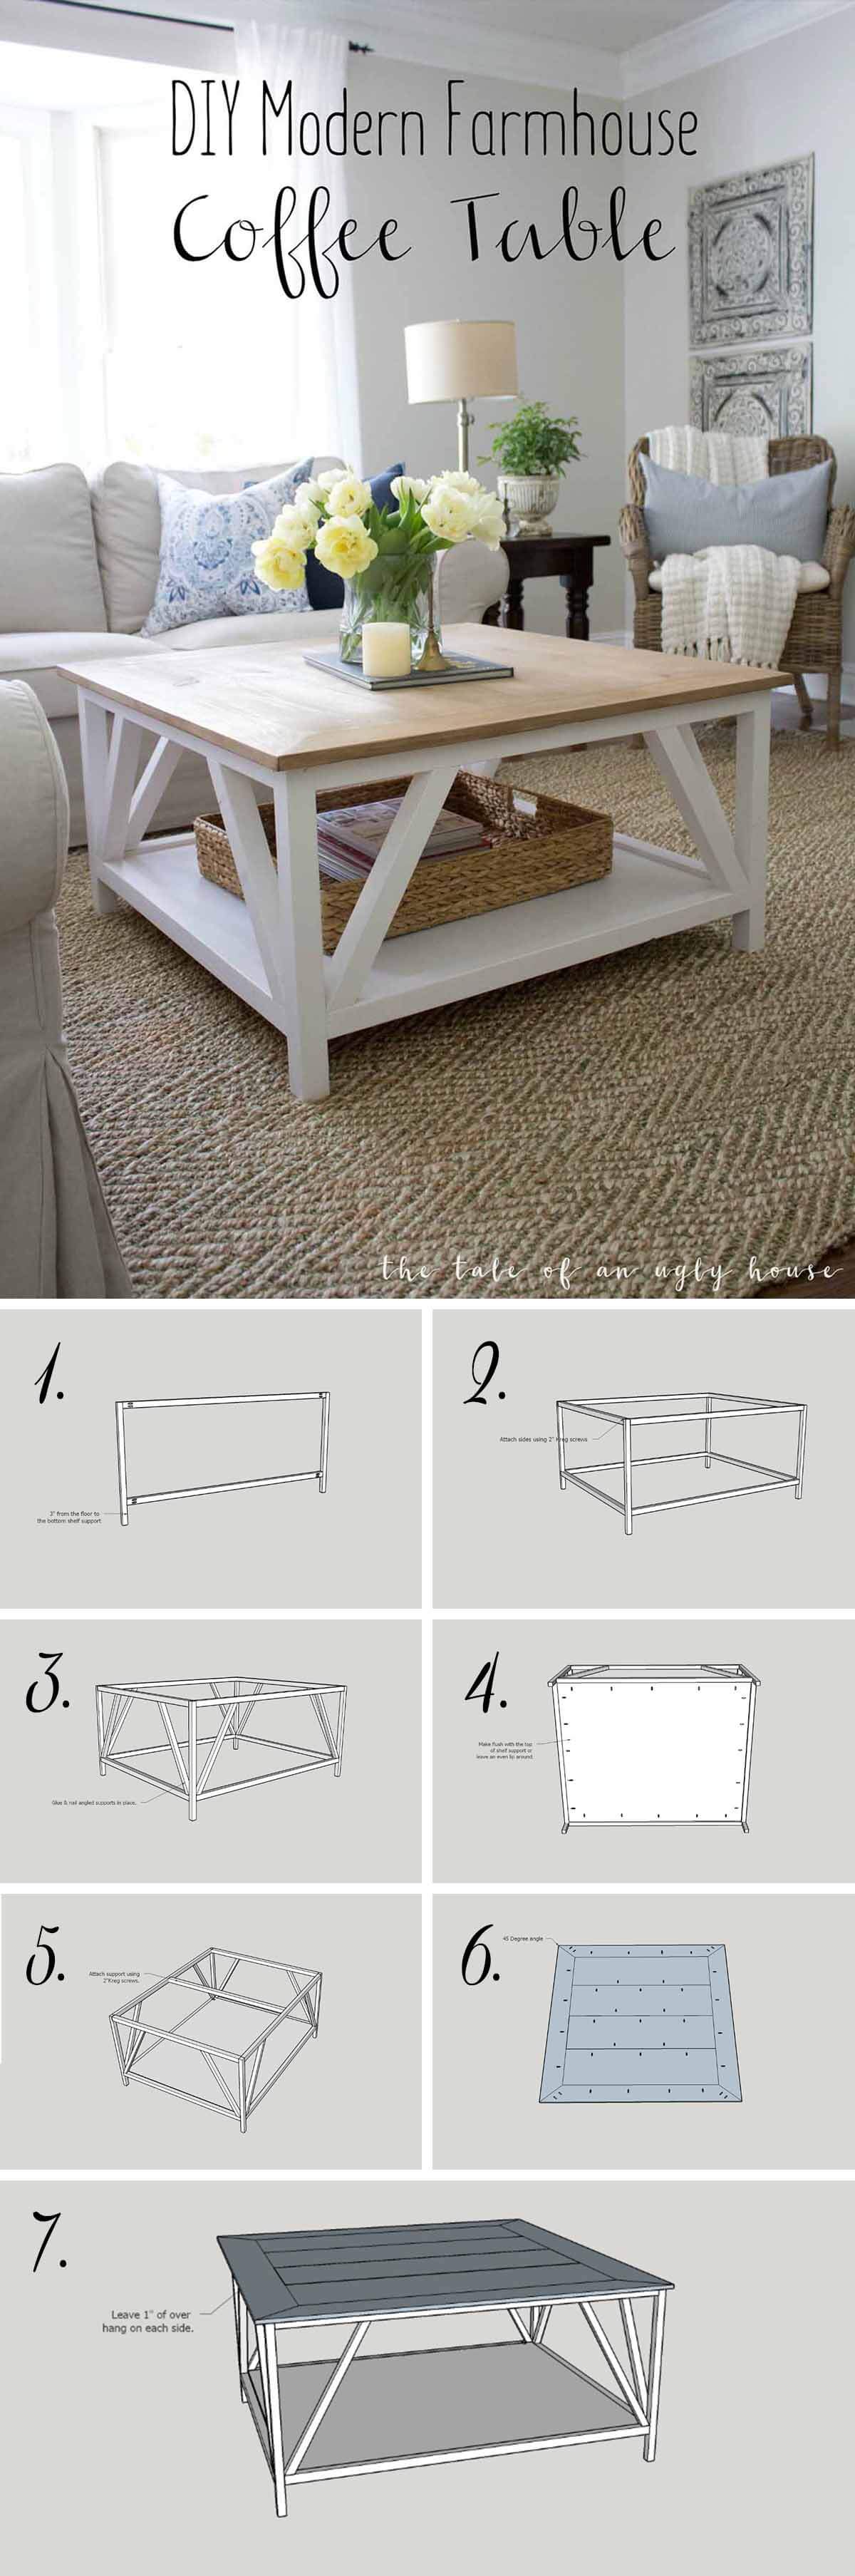 25 Best Diy Farmhouse Coffee Table Ideas And Designs For 2020